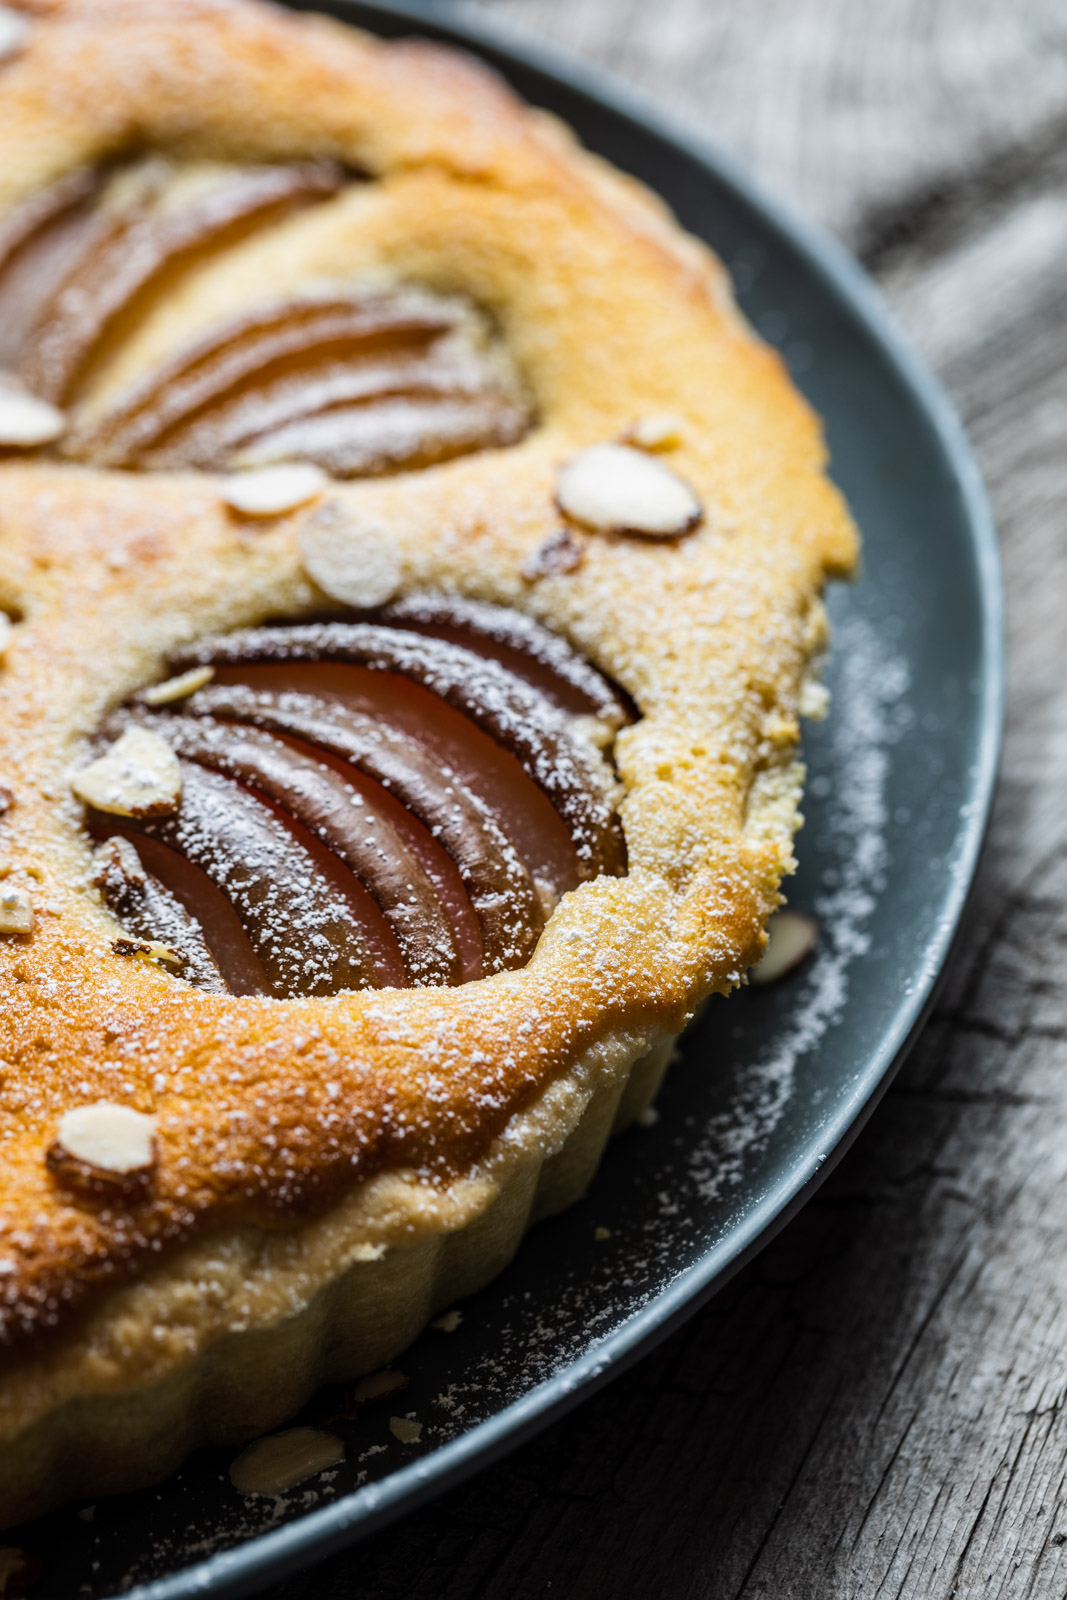 Poached Pear and Almond Tart